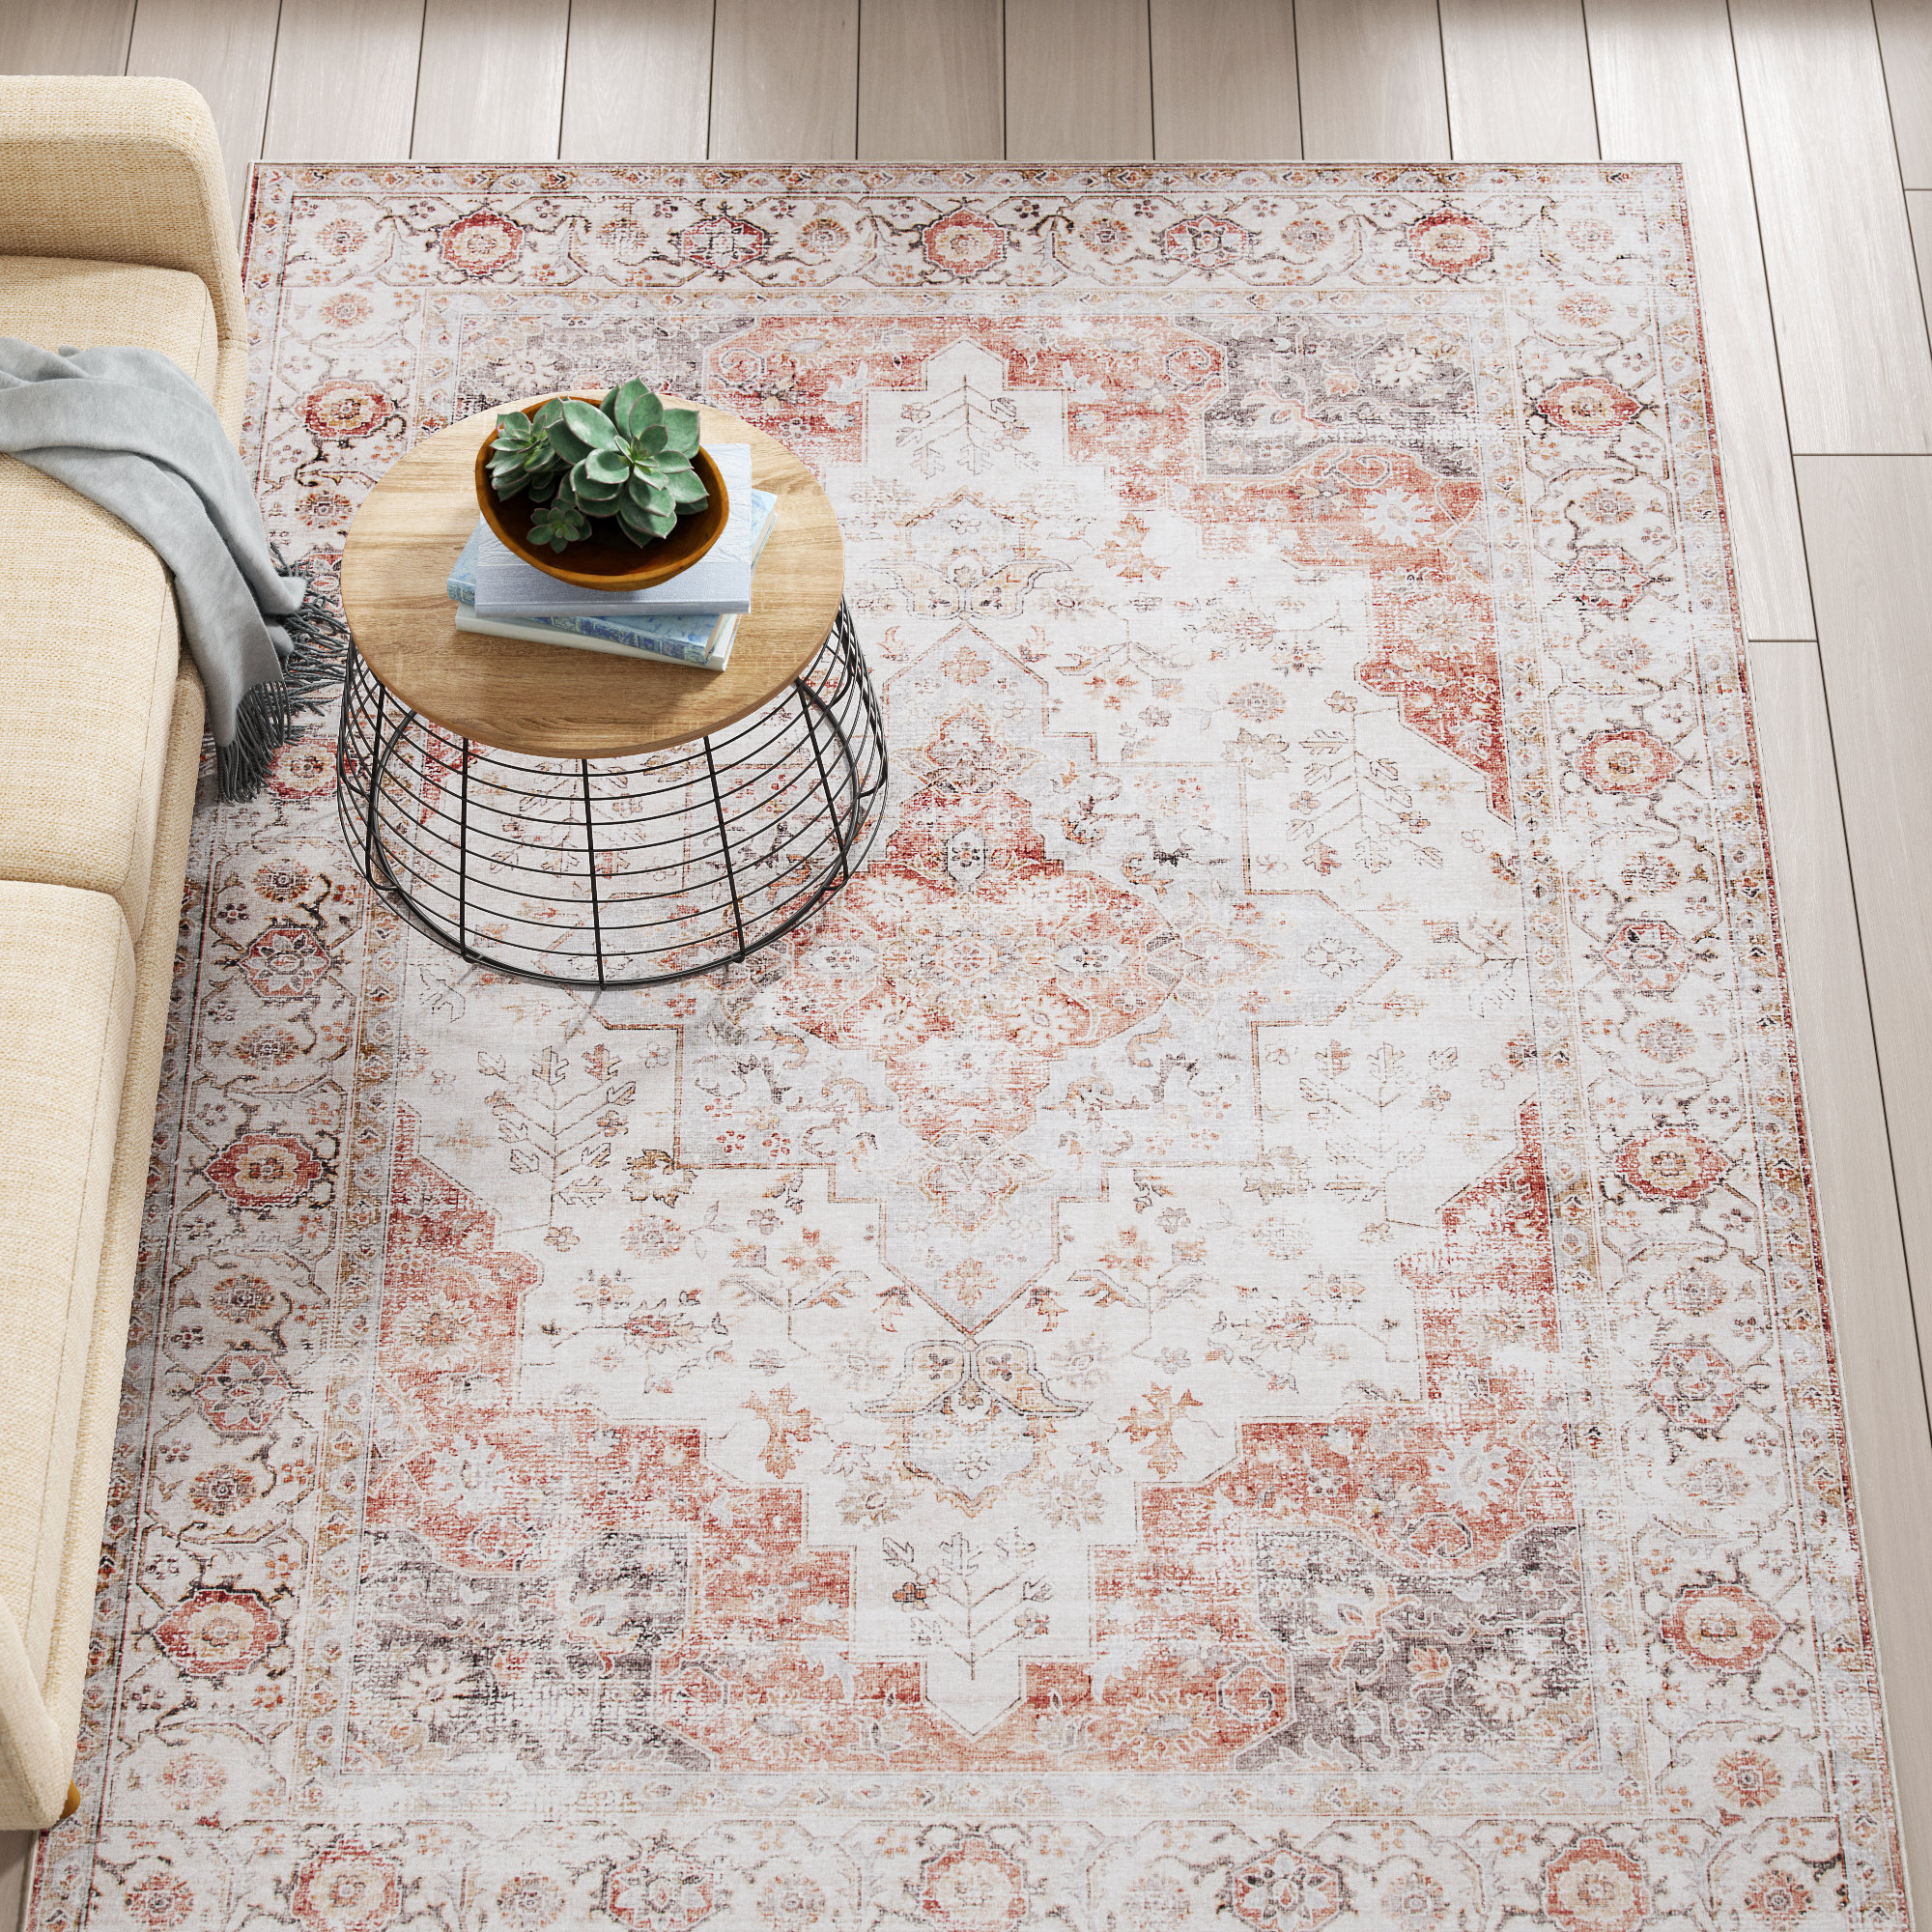 The best rug is this spill-proof, machine washable rug